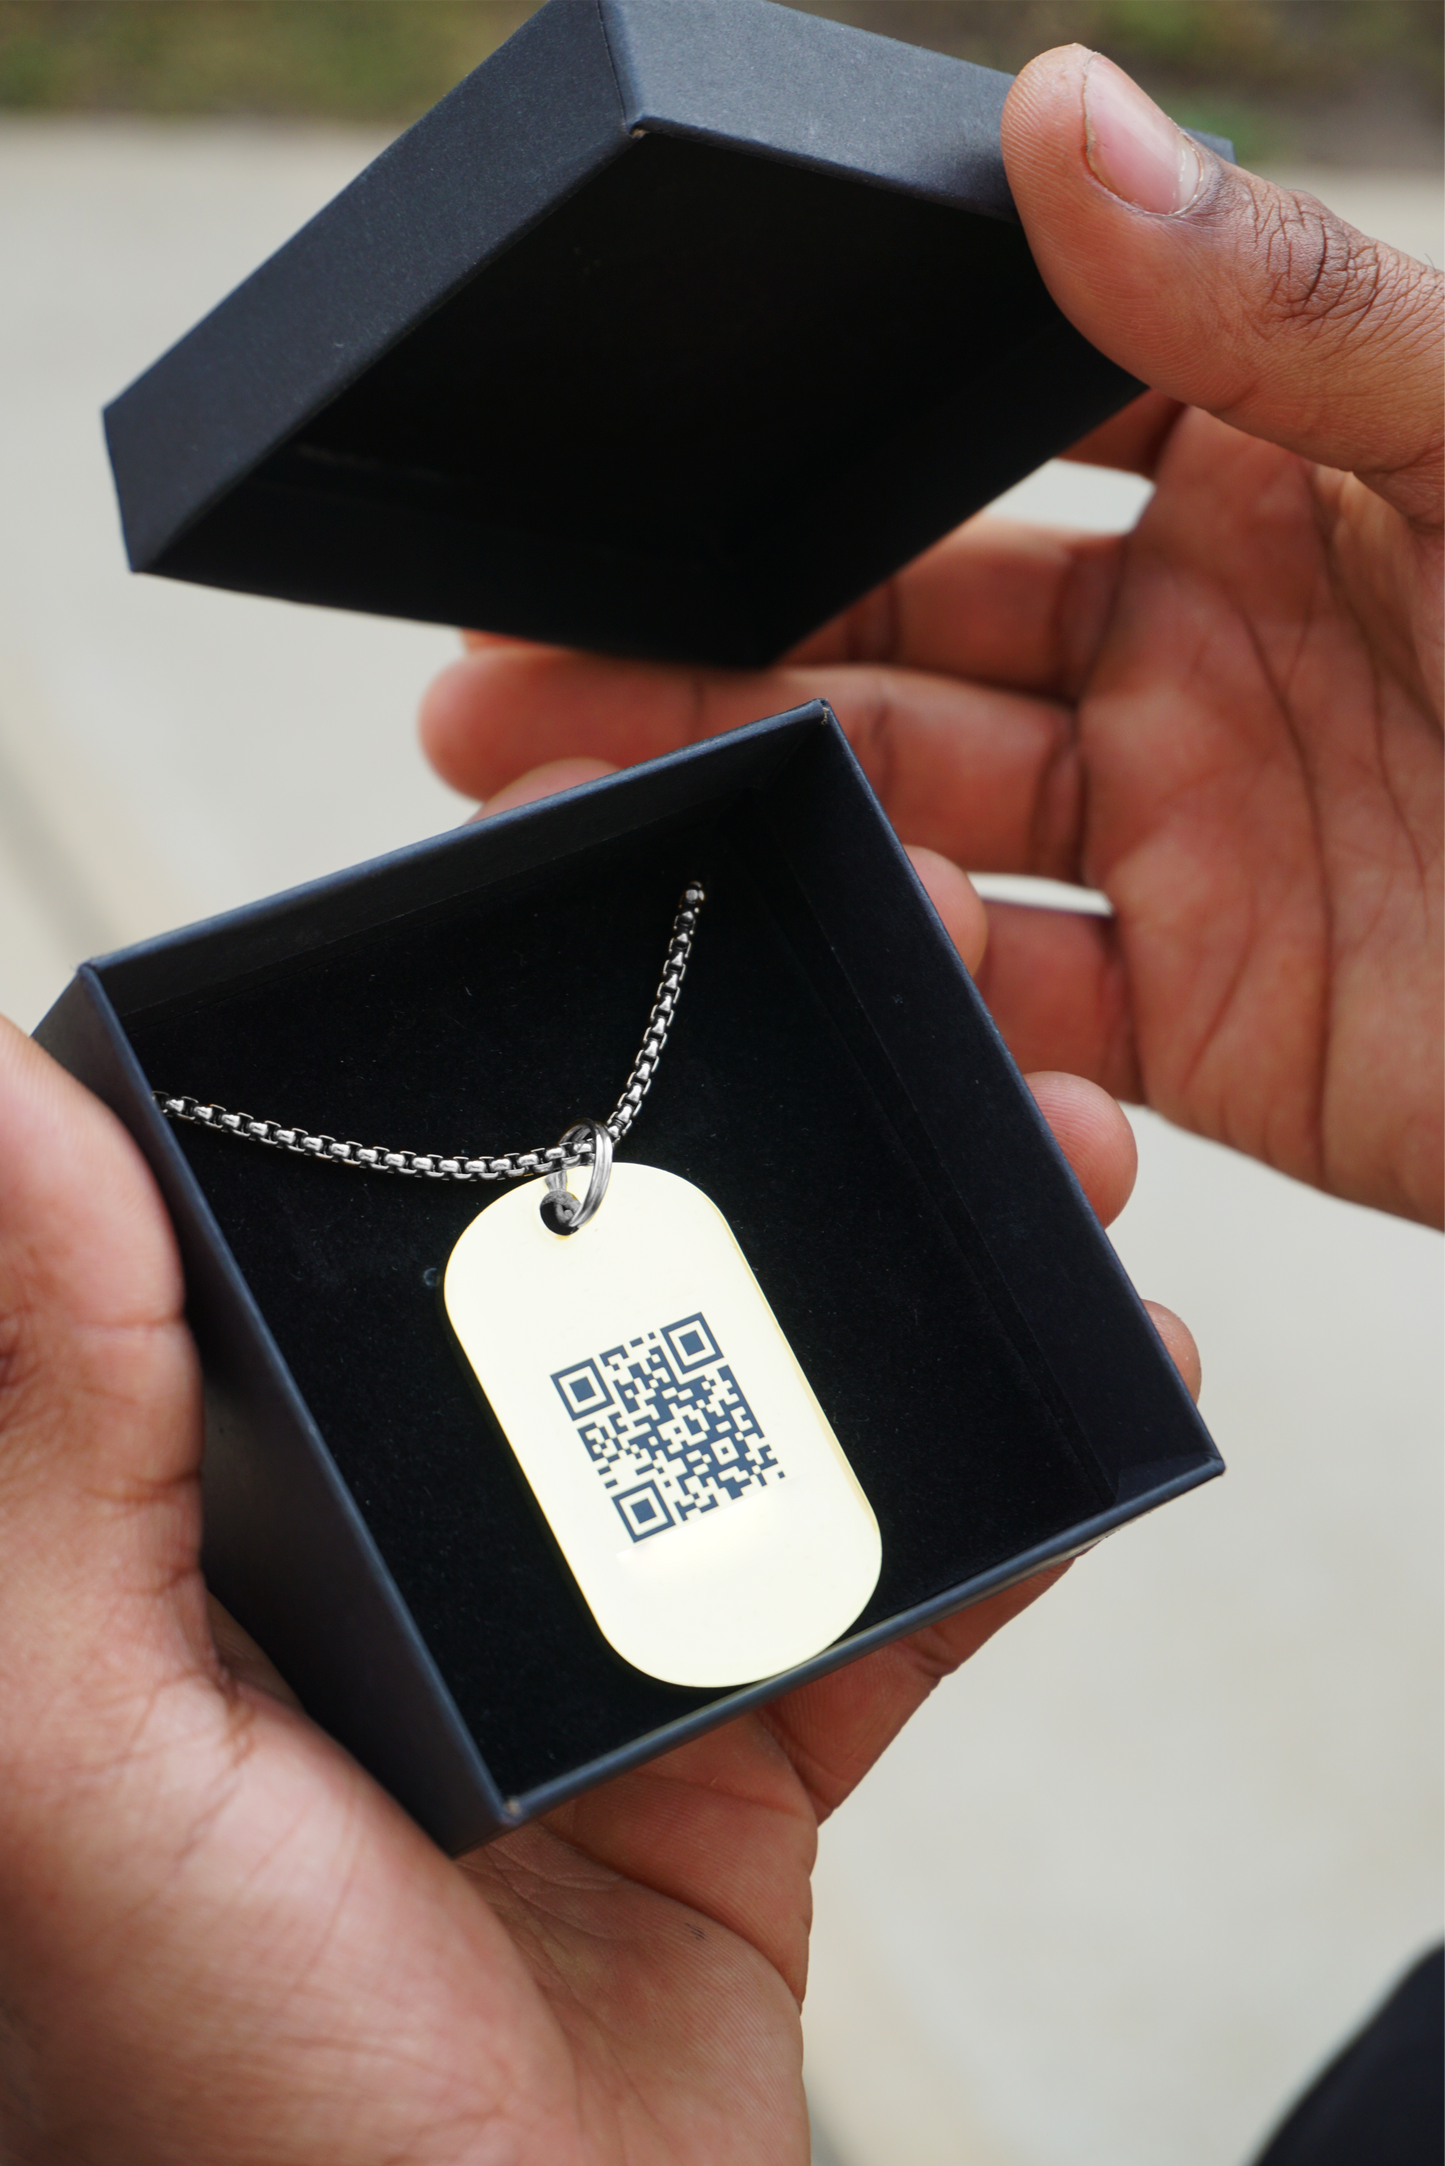 Hand opening a jewelry box to reveal a silver Jumptag wearable tech necklace with the Jumplink QR code facing up